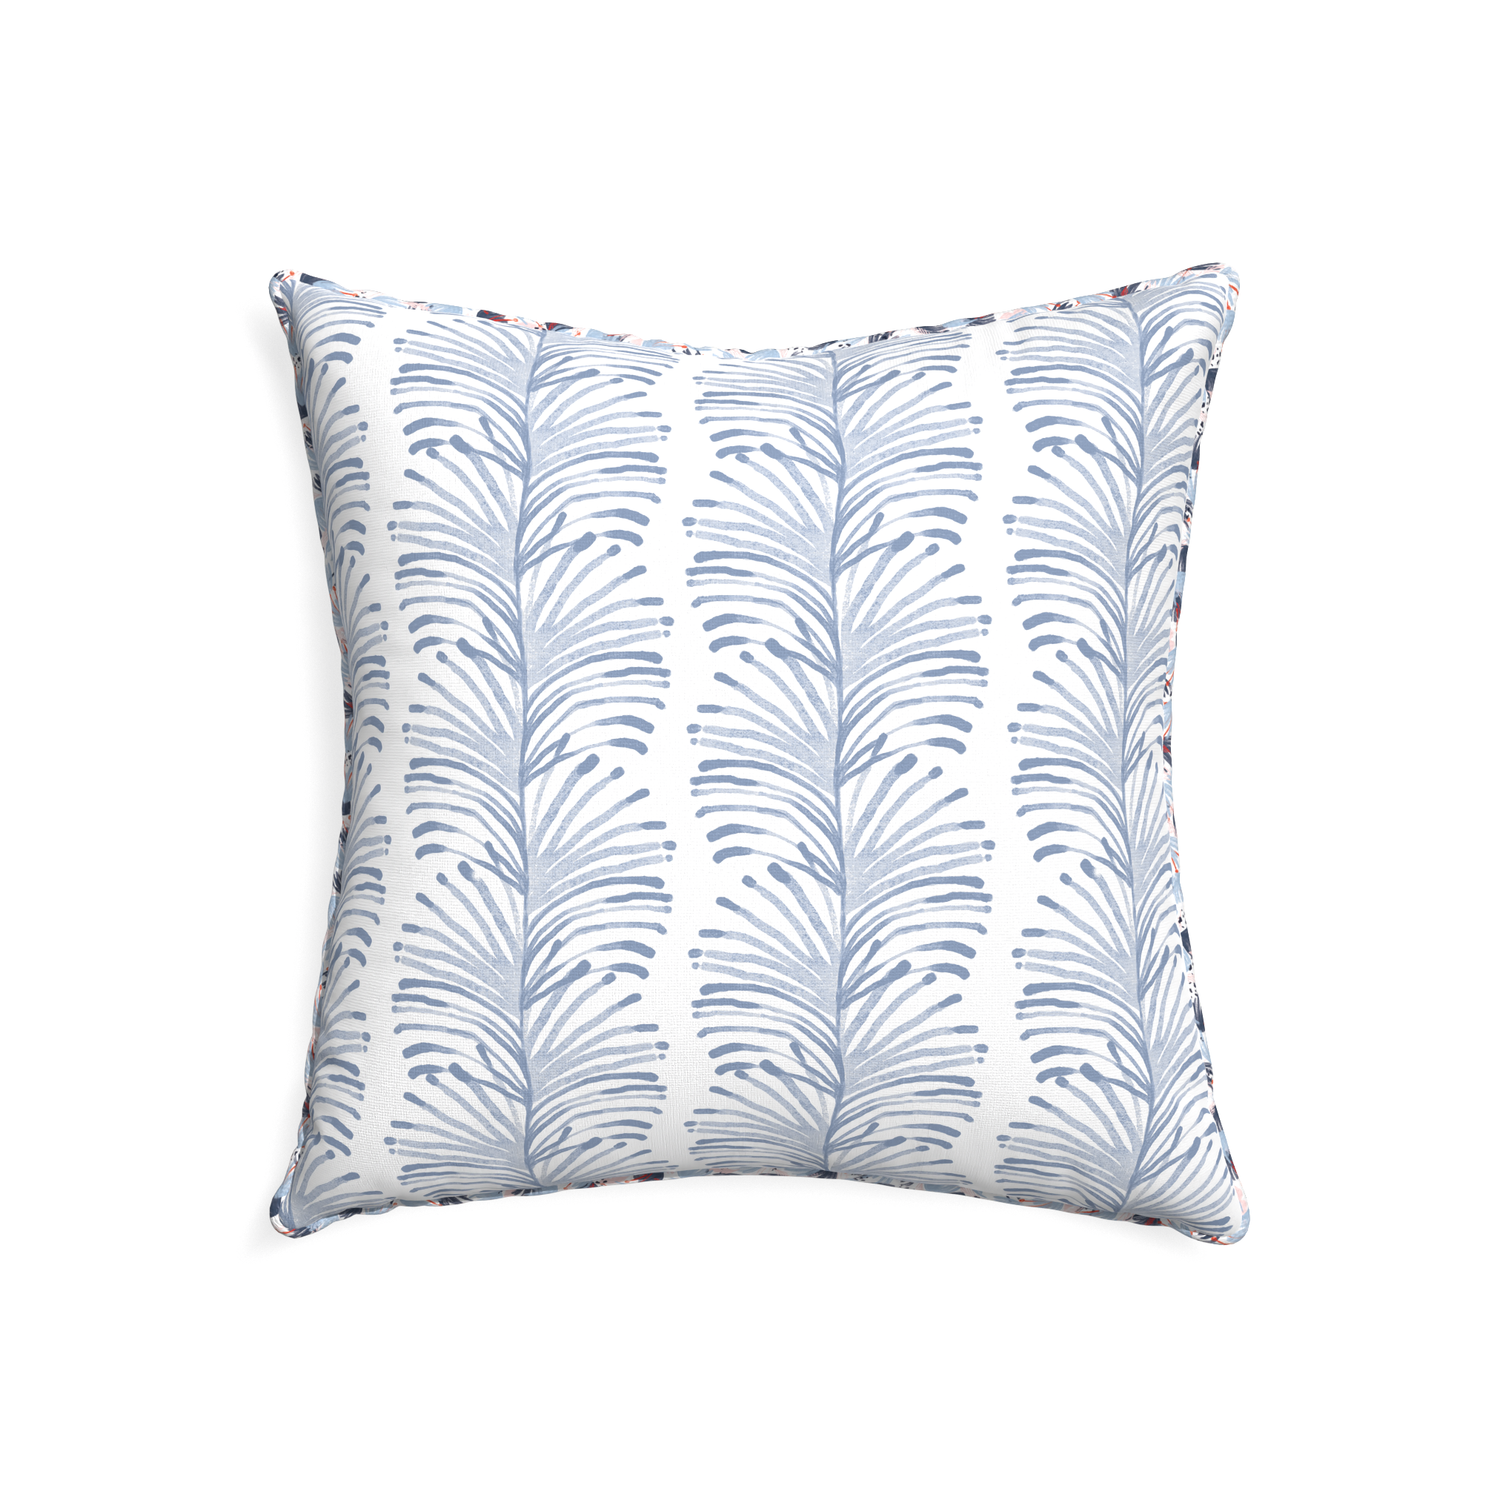 22-square emma sky custom sky blue botanical stripepillow with e piping on white background